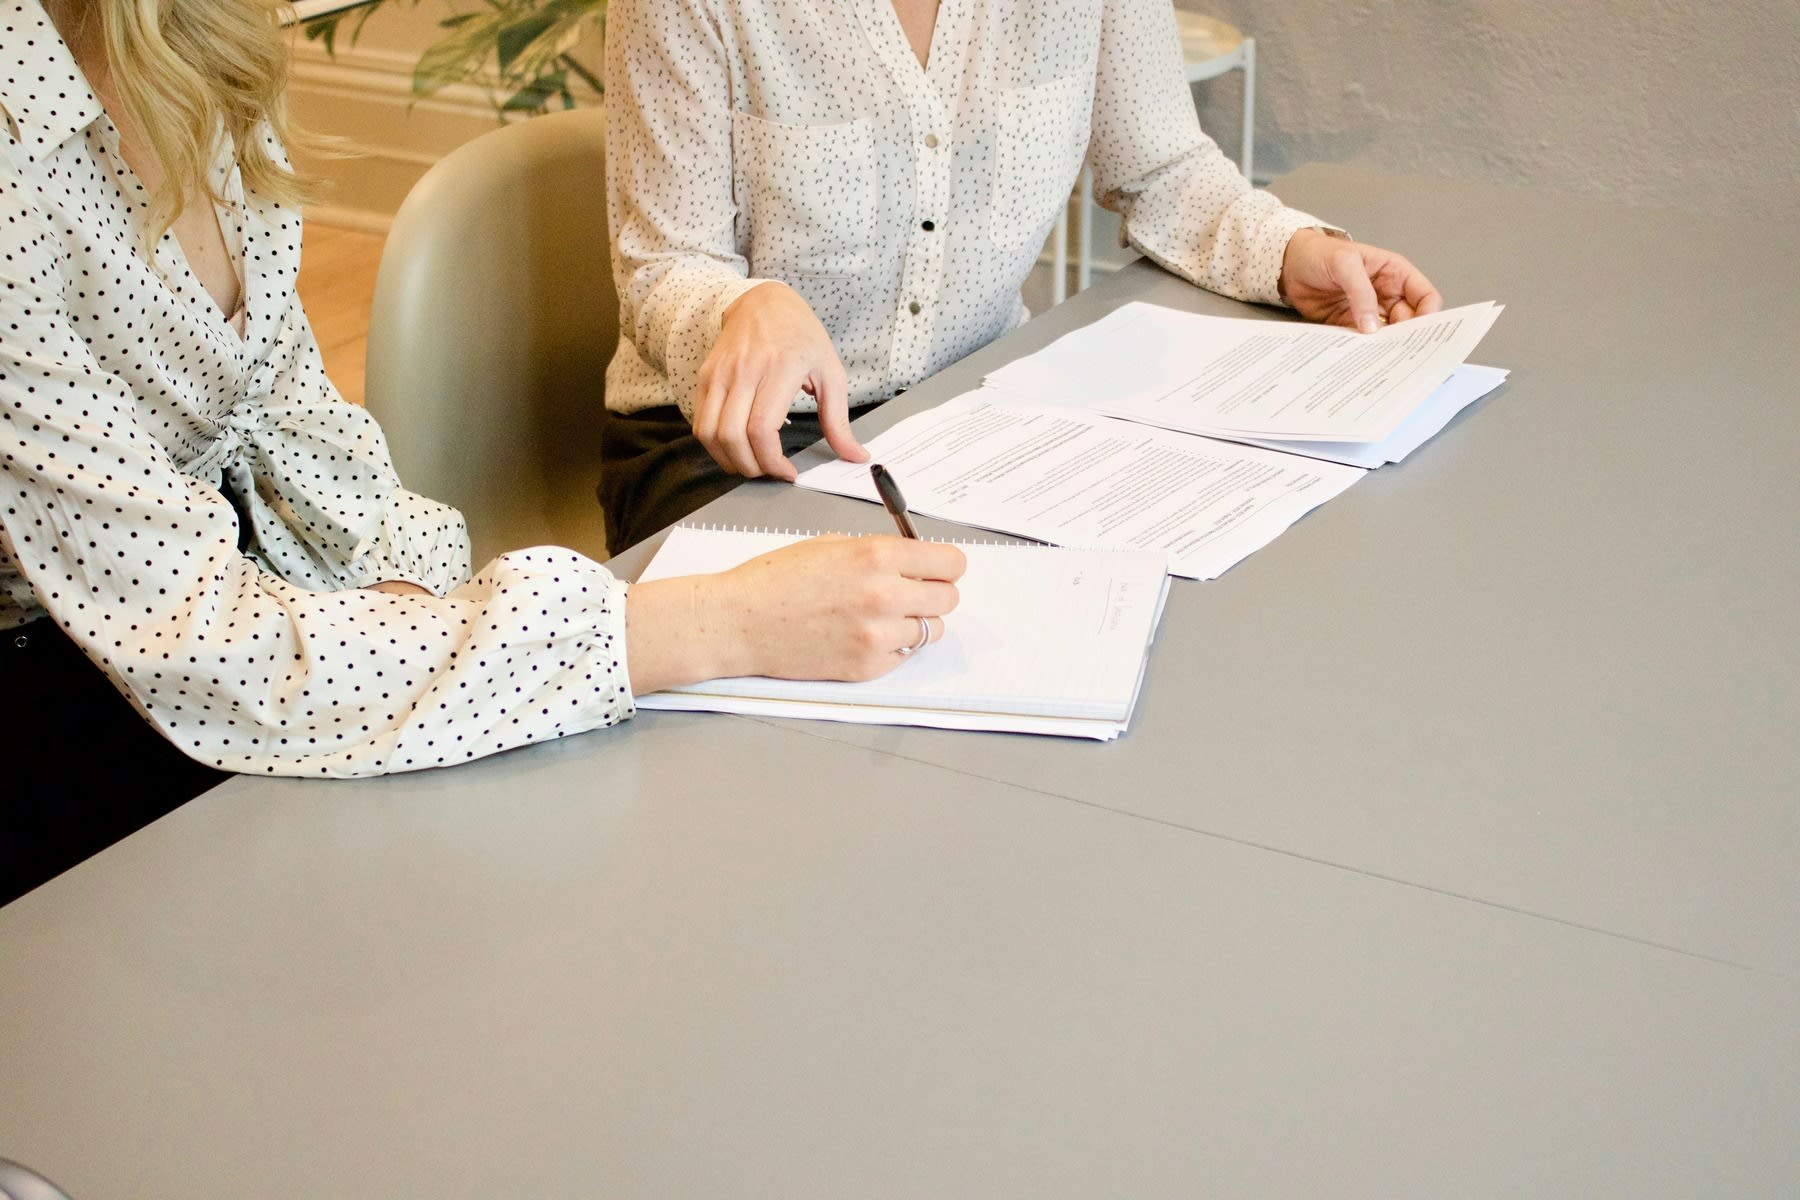 Woman signing documents, while the person seated beside her are sorting documents